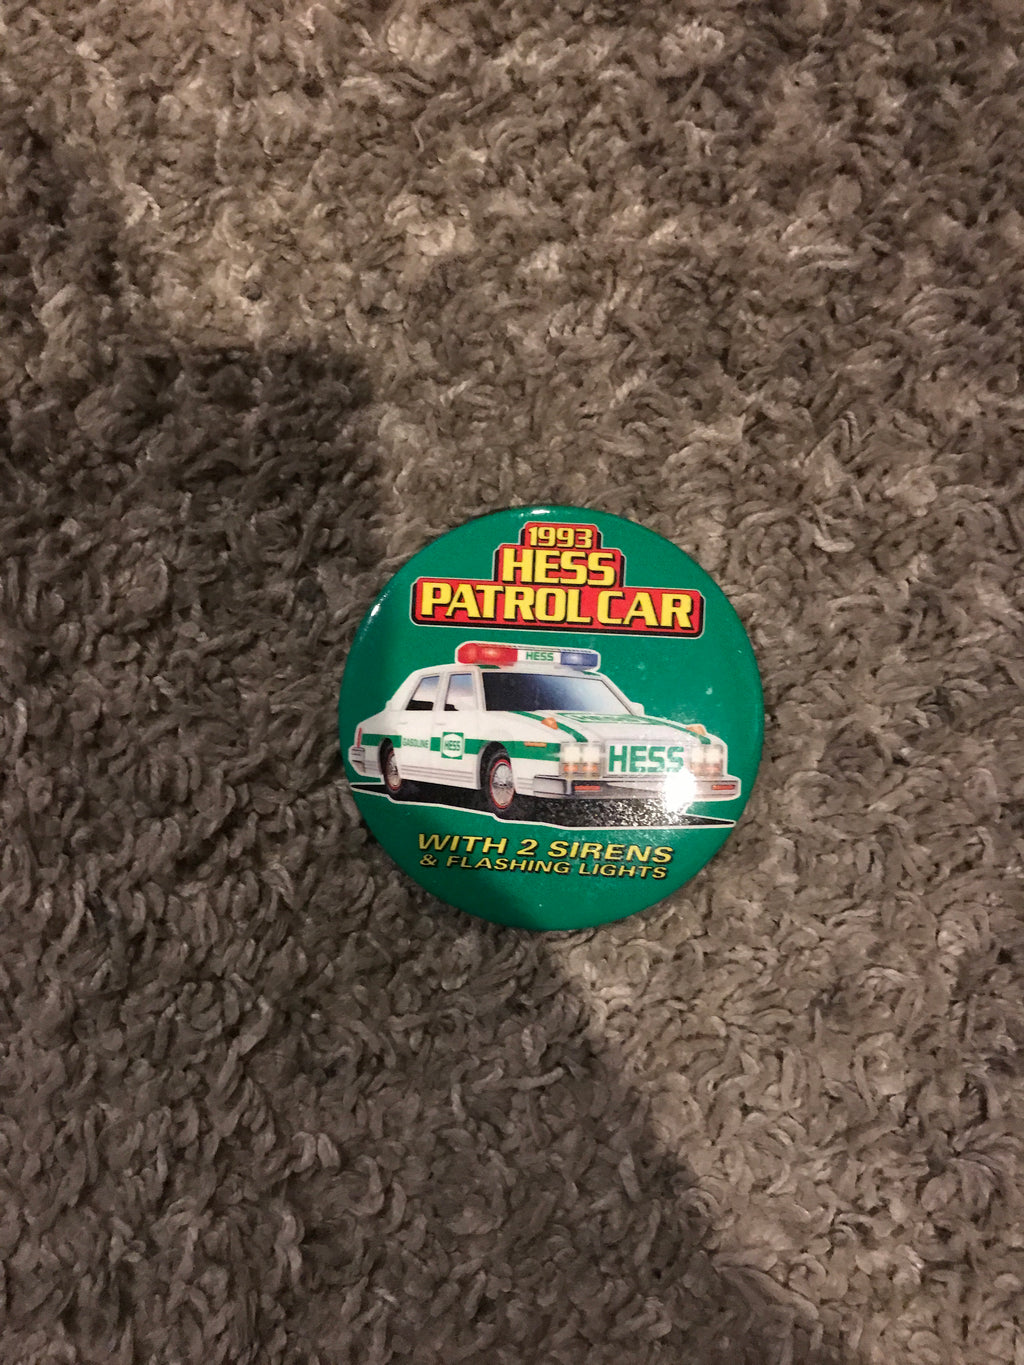 Hess Toy Truck Cashier Pinback Buttons Lot Of 1 1993 #7 Gas Station Badge Medal - Aj Collectibles & More